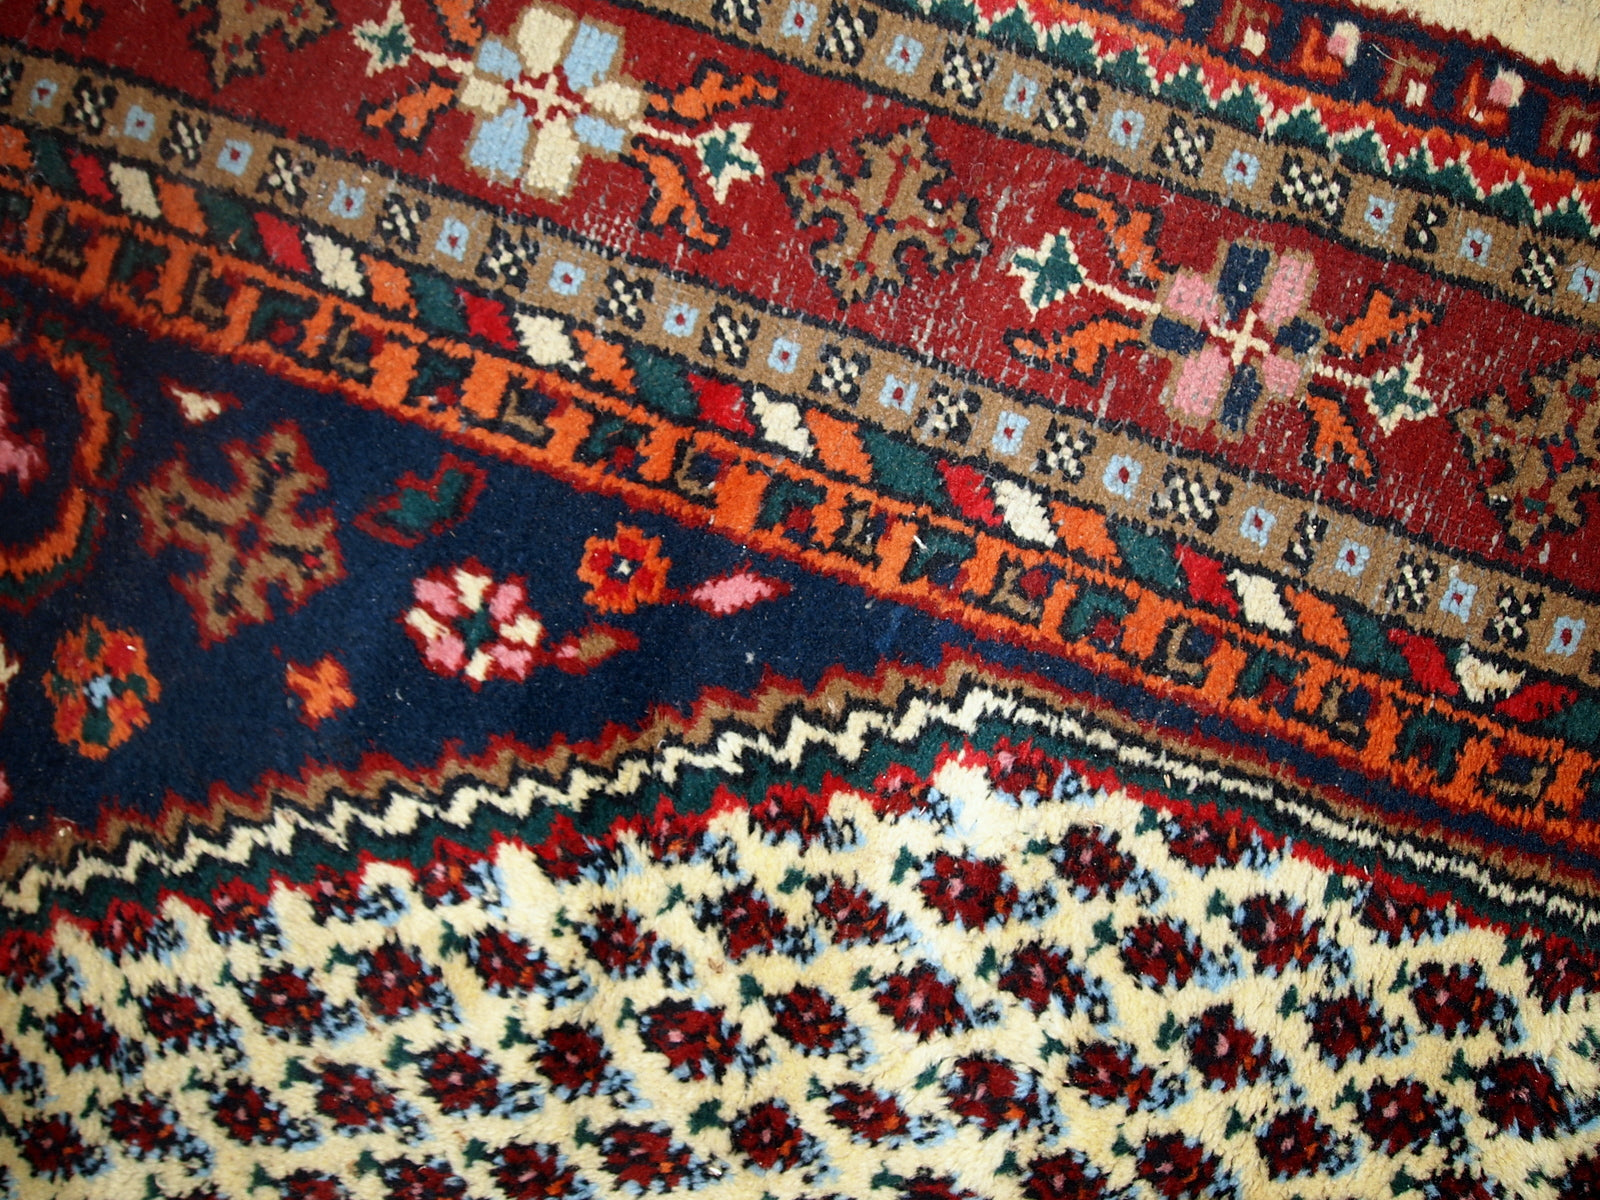 Handmade vintage Hamadan rug in distressed condition ( it has some areas with low pile). The rug is from the end of 20th century made in wool.